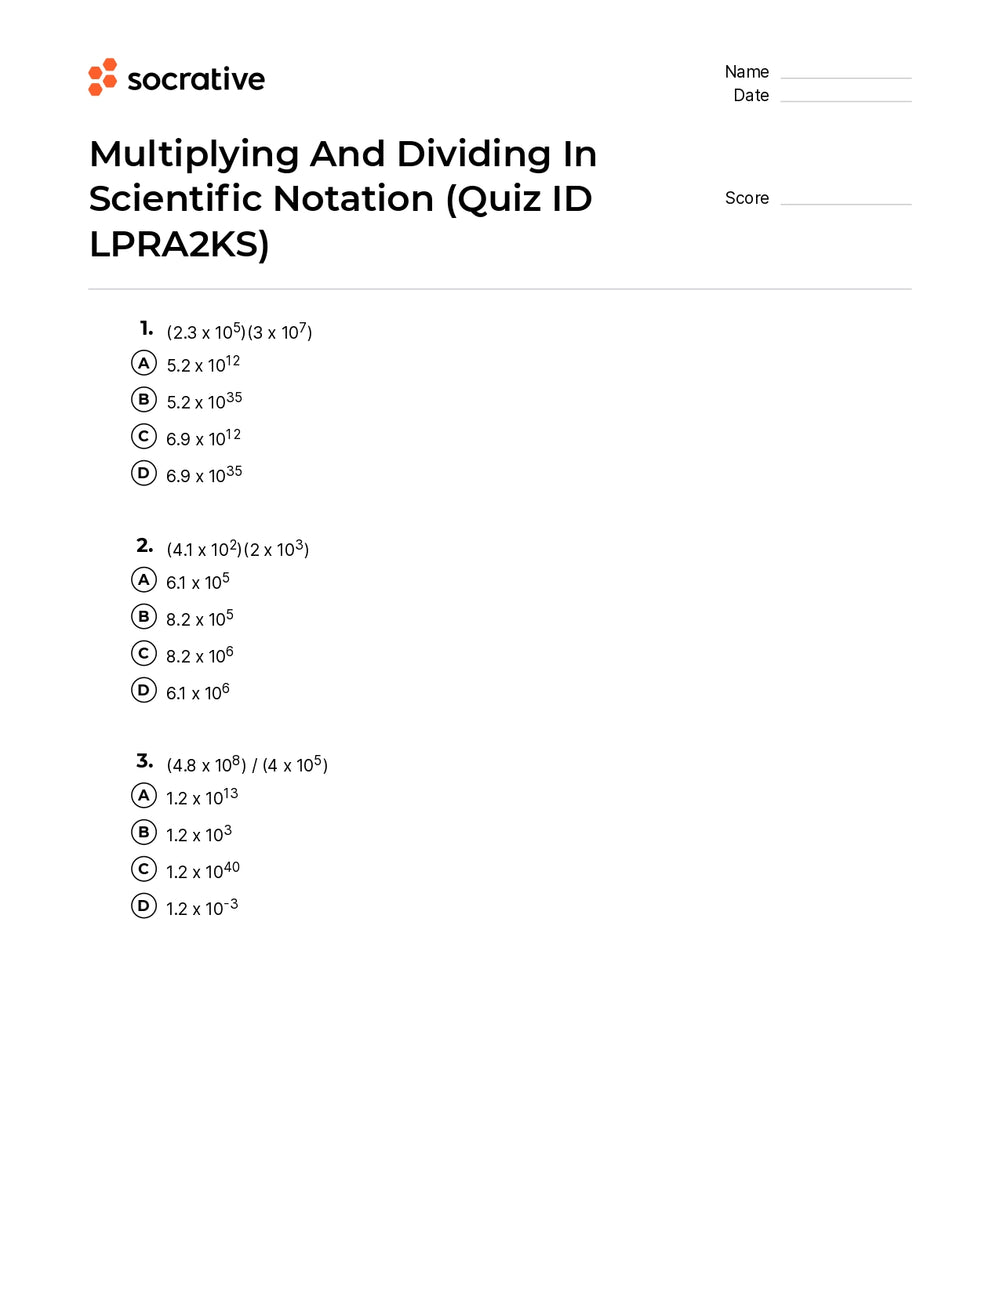 multiplying-and-dividing-in-scientific-notation-quiz-shop